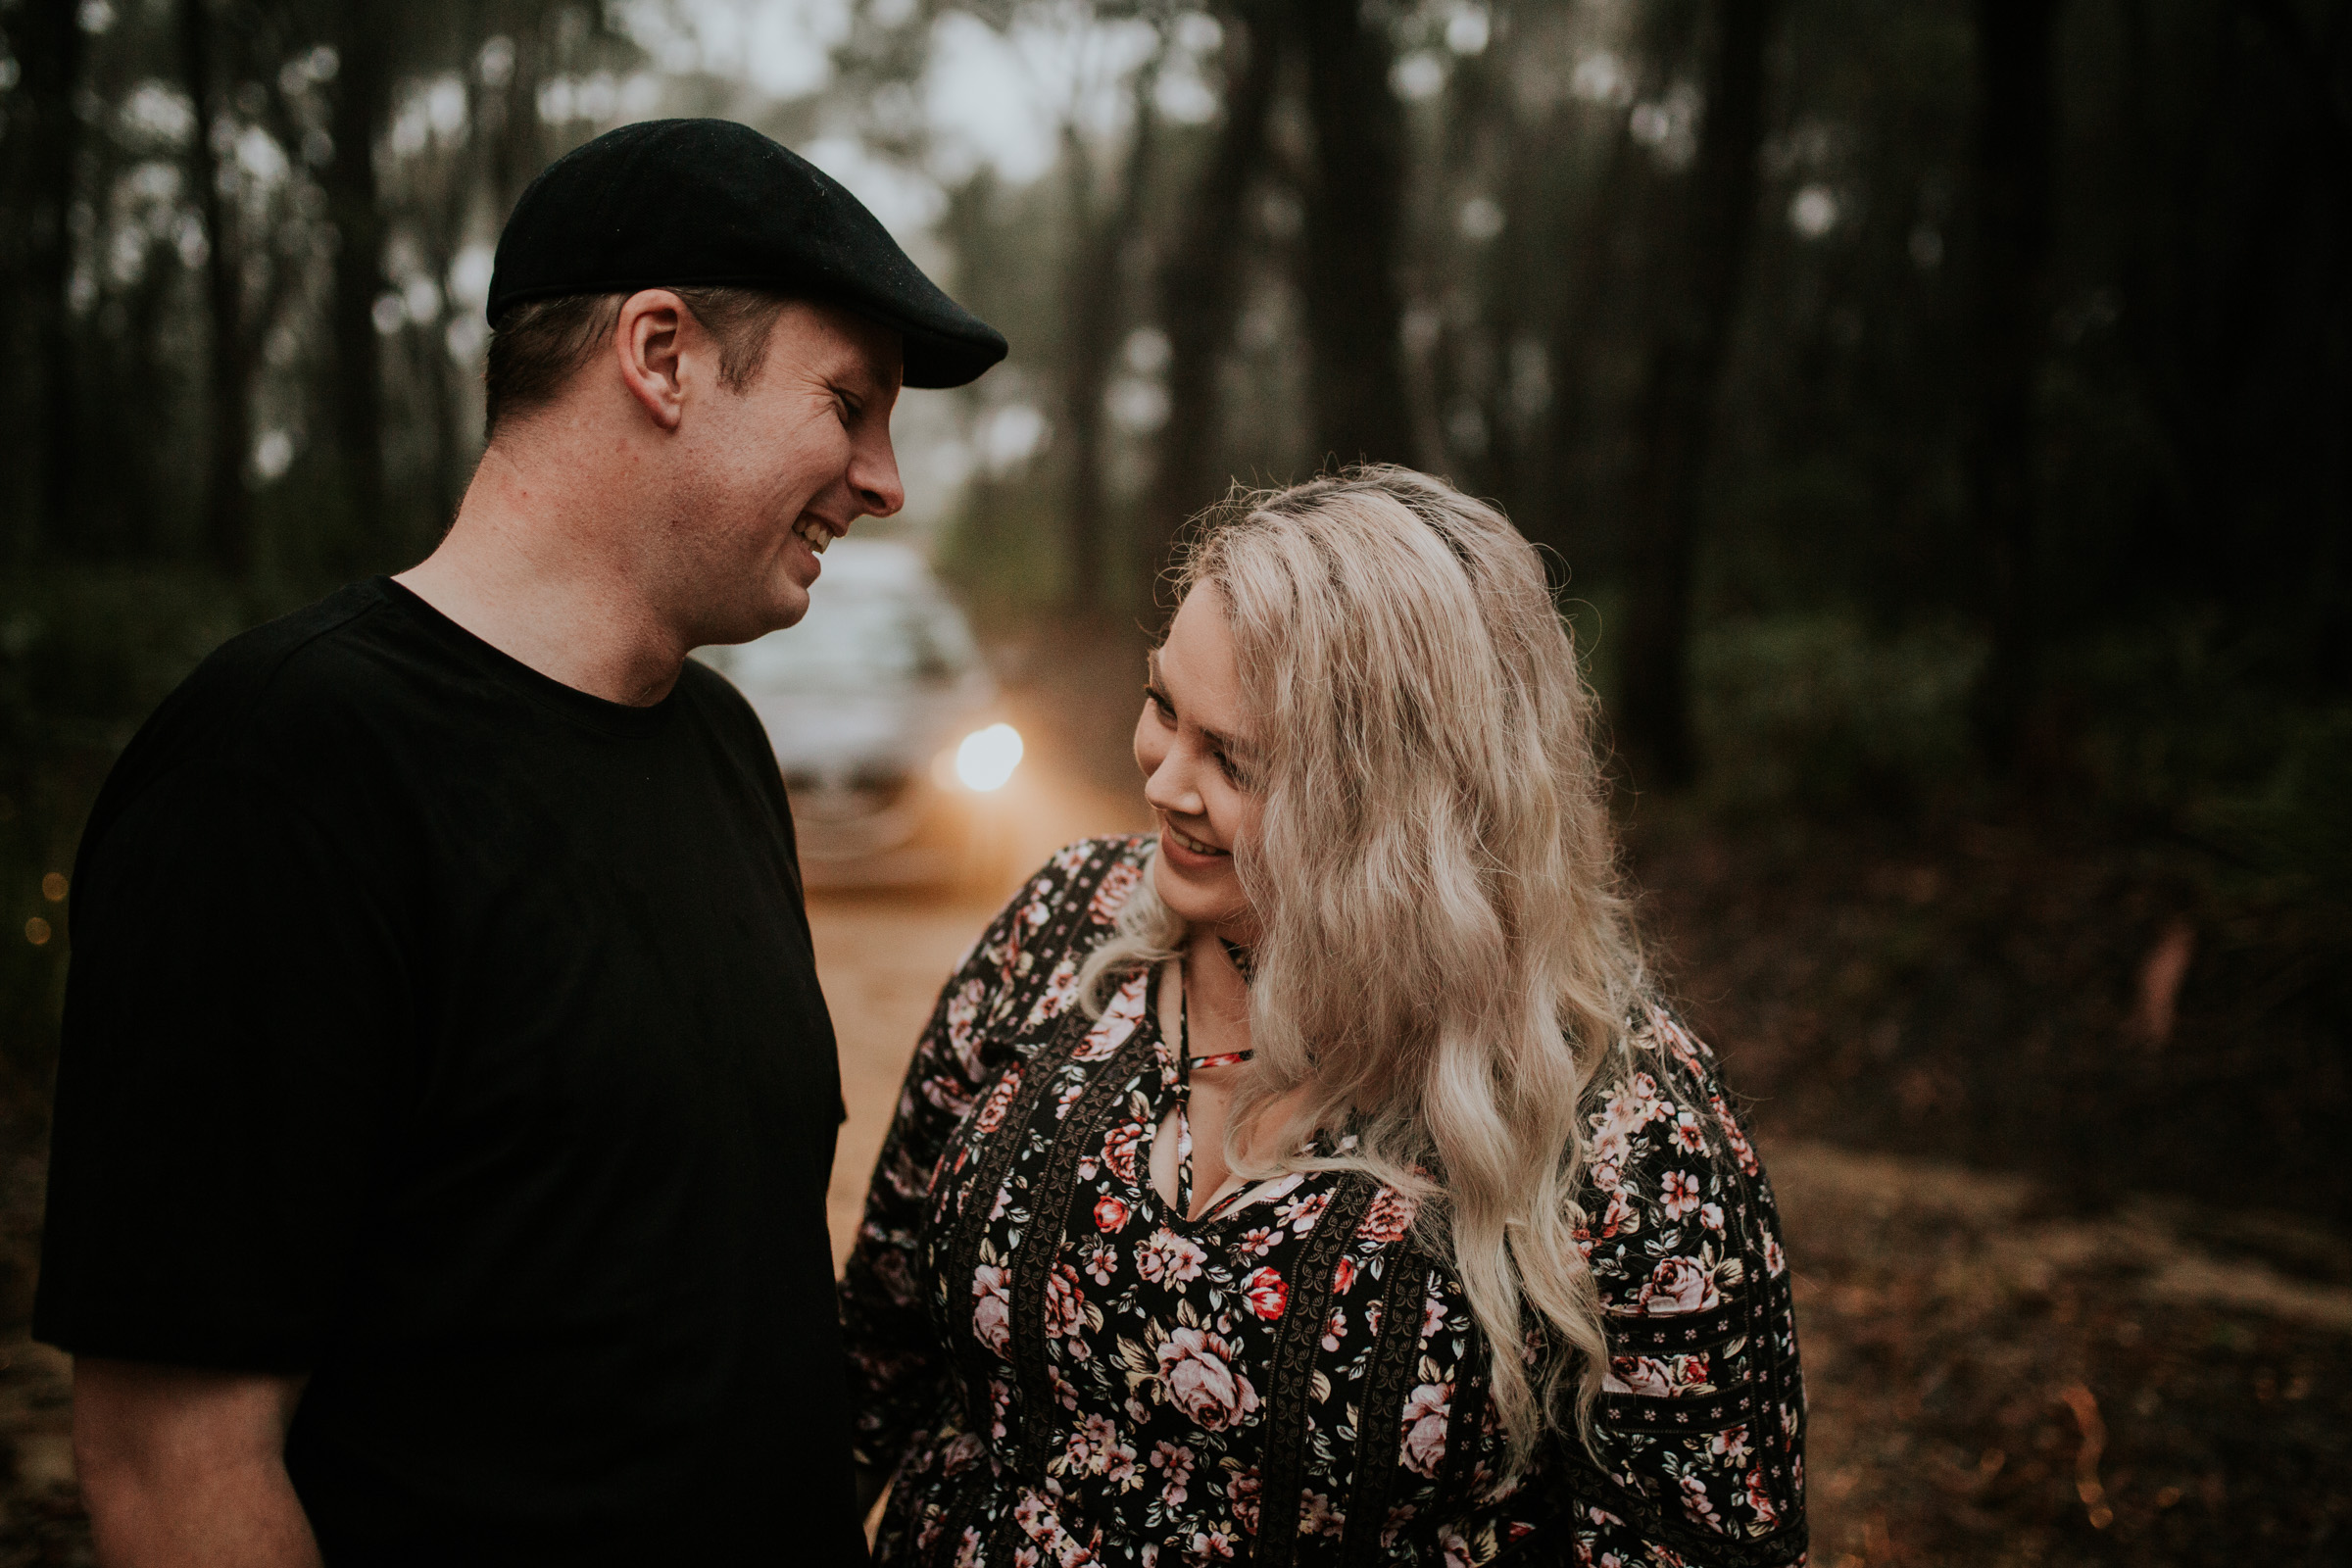 Bree+Rob+Southern+Highlands+Robertson+Engagement+Session-45.jpg